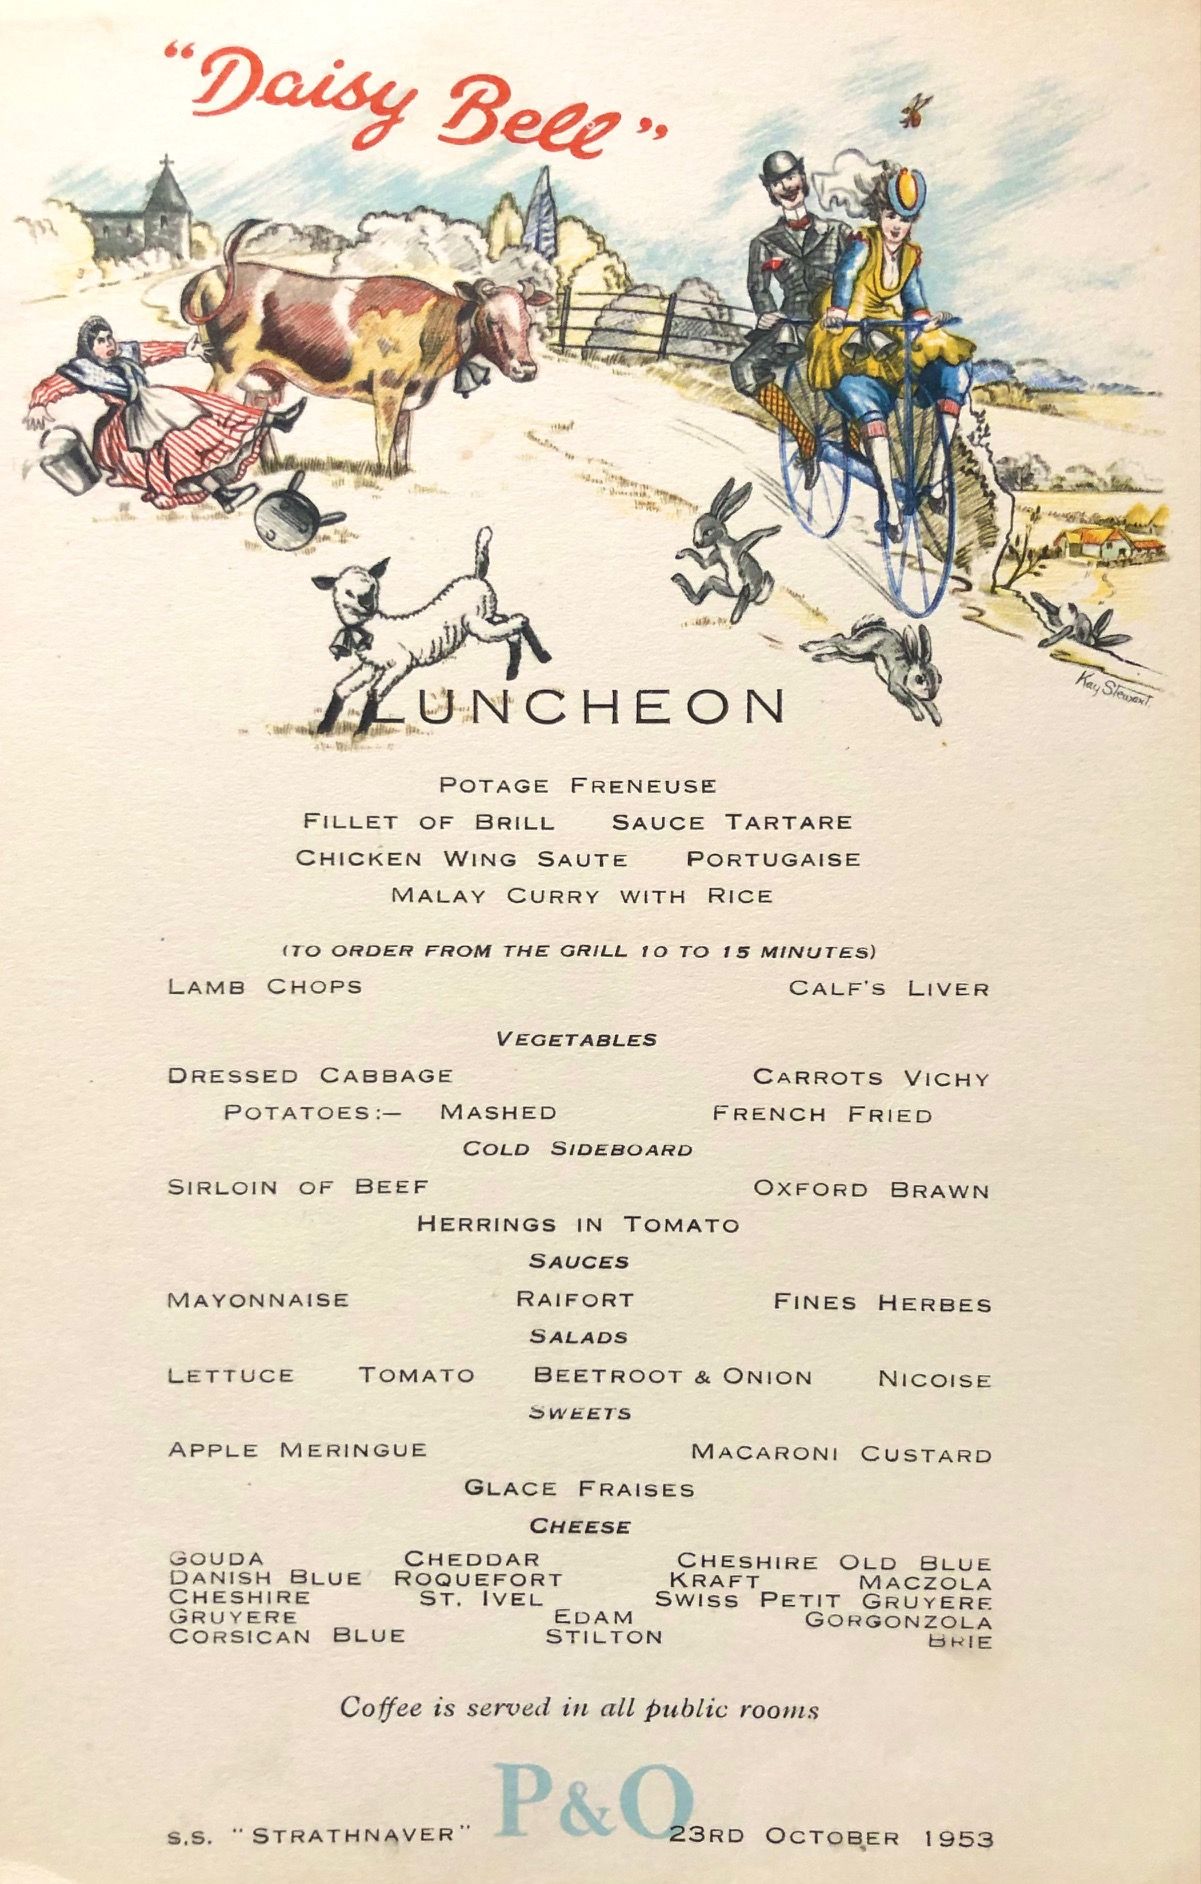 *NEW* P & O Lines. S.S. "Strathnaver" Luncheon Menu - Daisy Bell